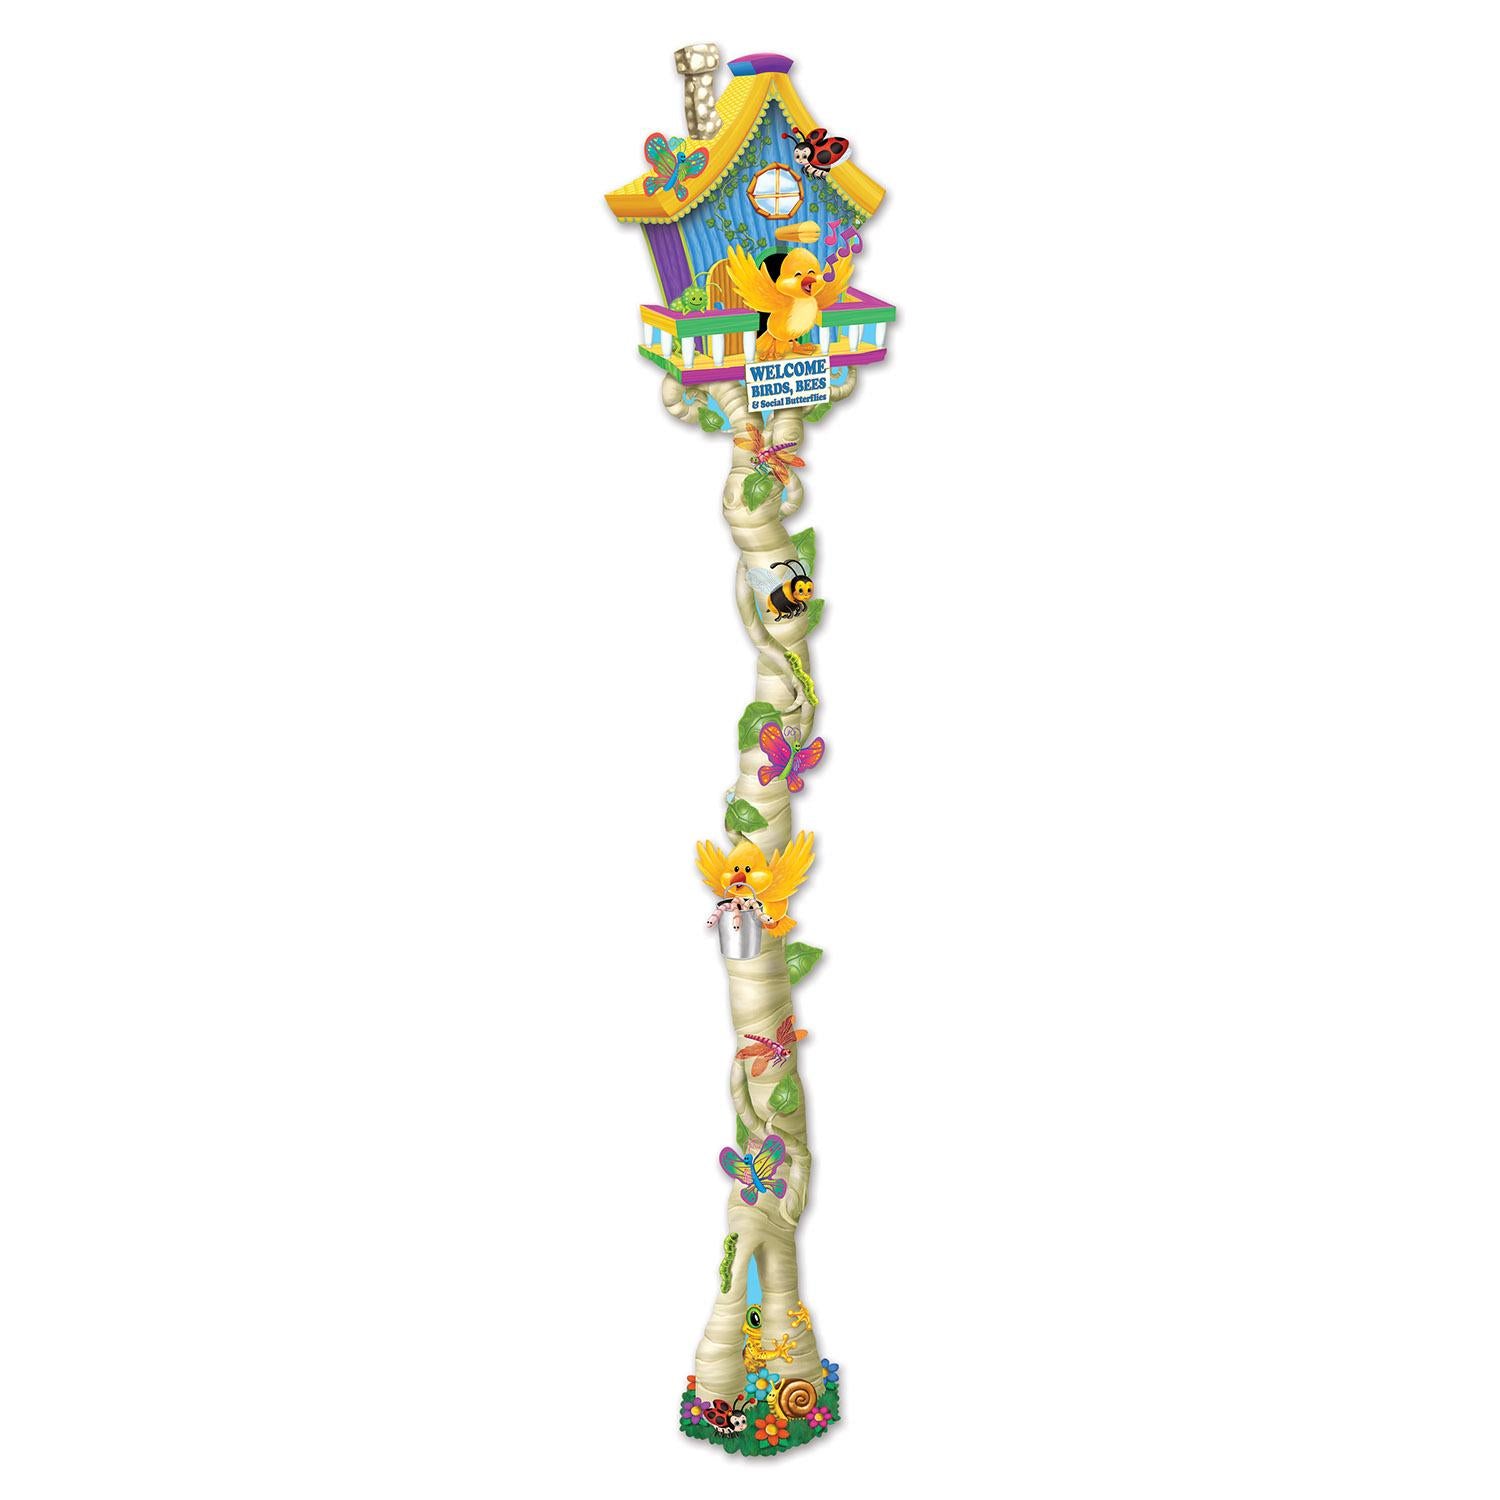 Beistle Jointed Spring Birdhouse Party Decoration